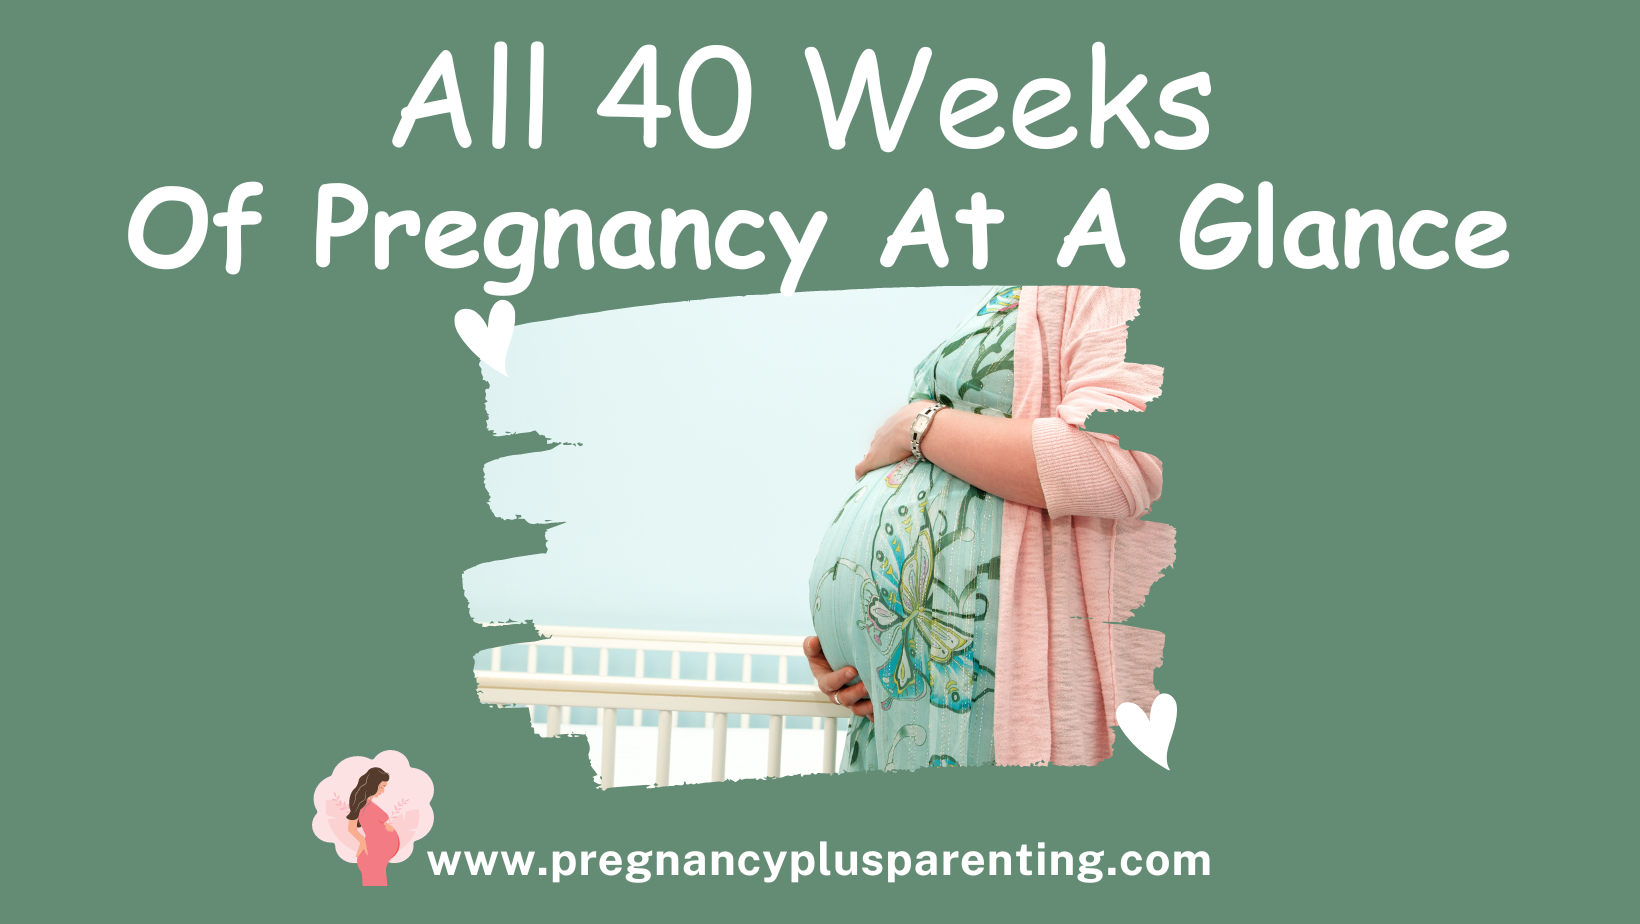 All 40 Weeks Of Pregnancy At A Glance